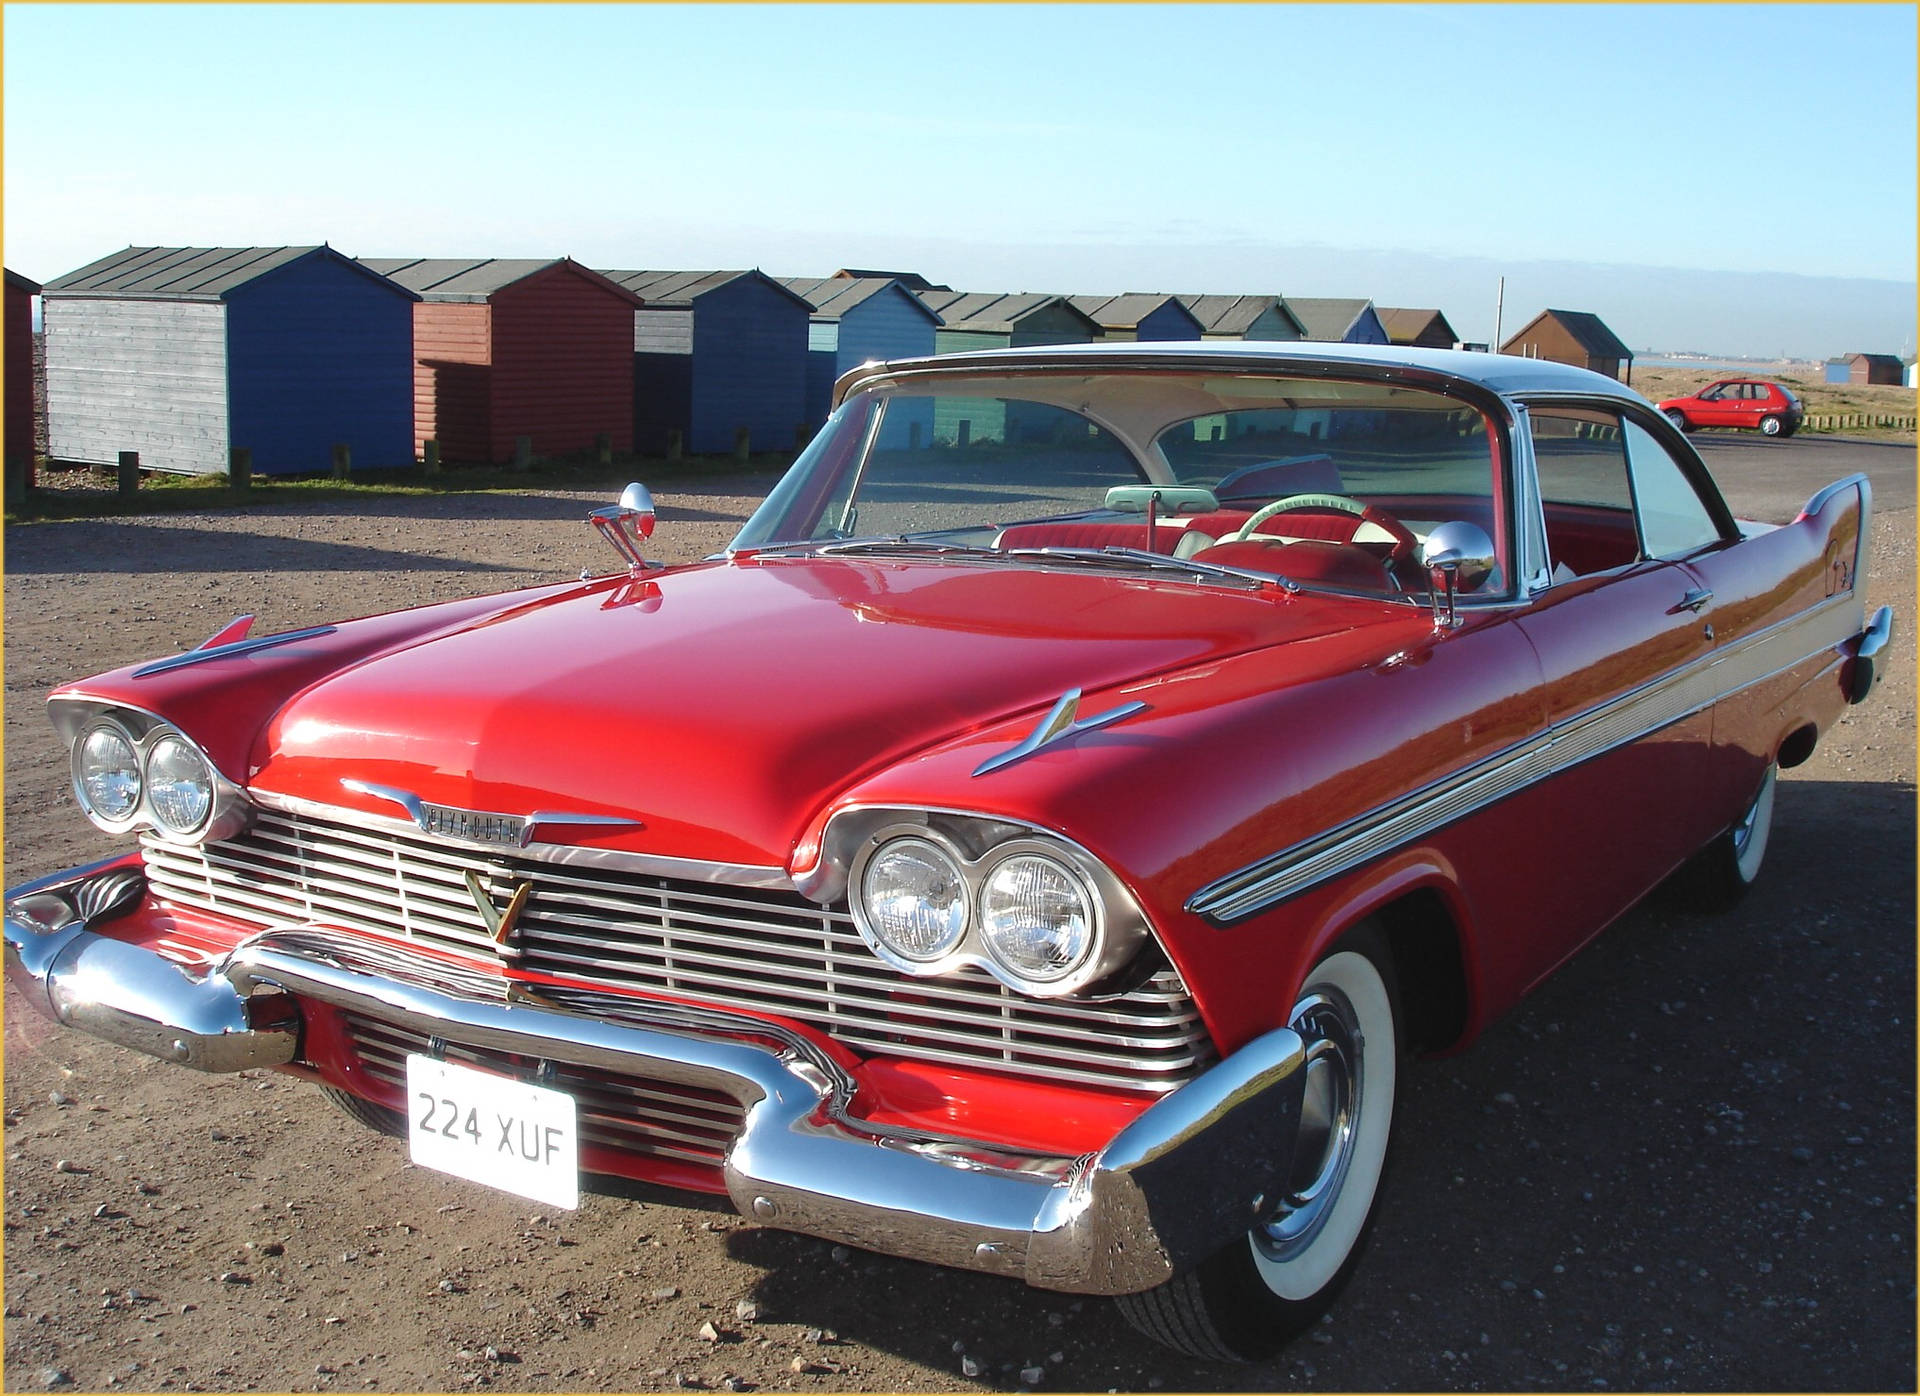 1958 Red Plymouth Fury Vintage Car Wallpaper